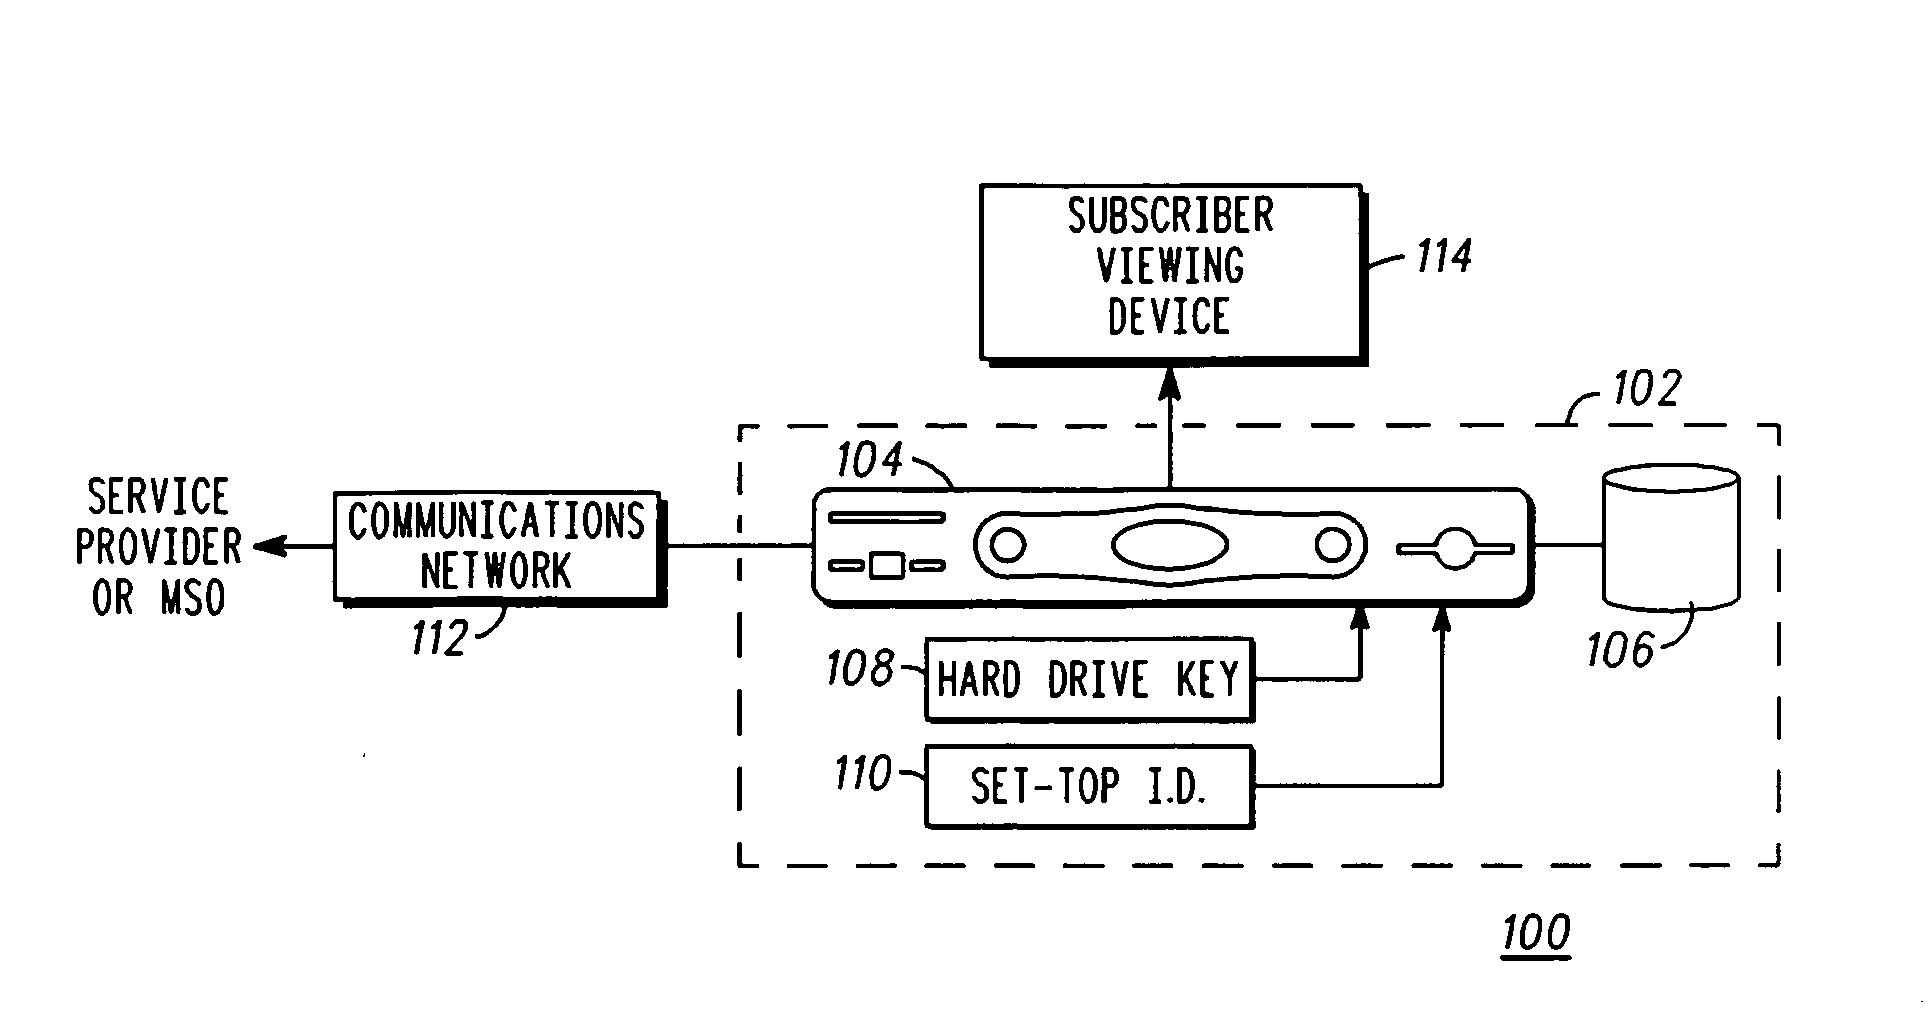 Method and apparatus for storing and retrieving encrypted programming content such that it is accessible to authorized users from multiple set top boxes